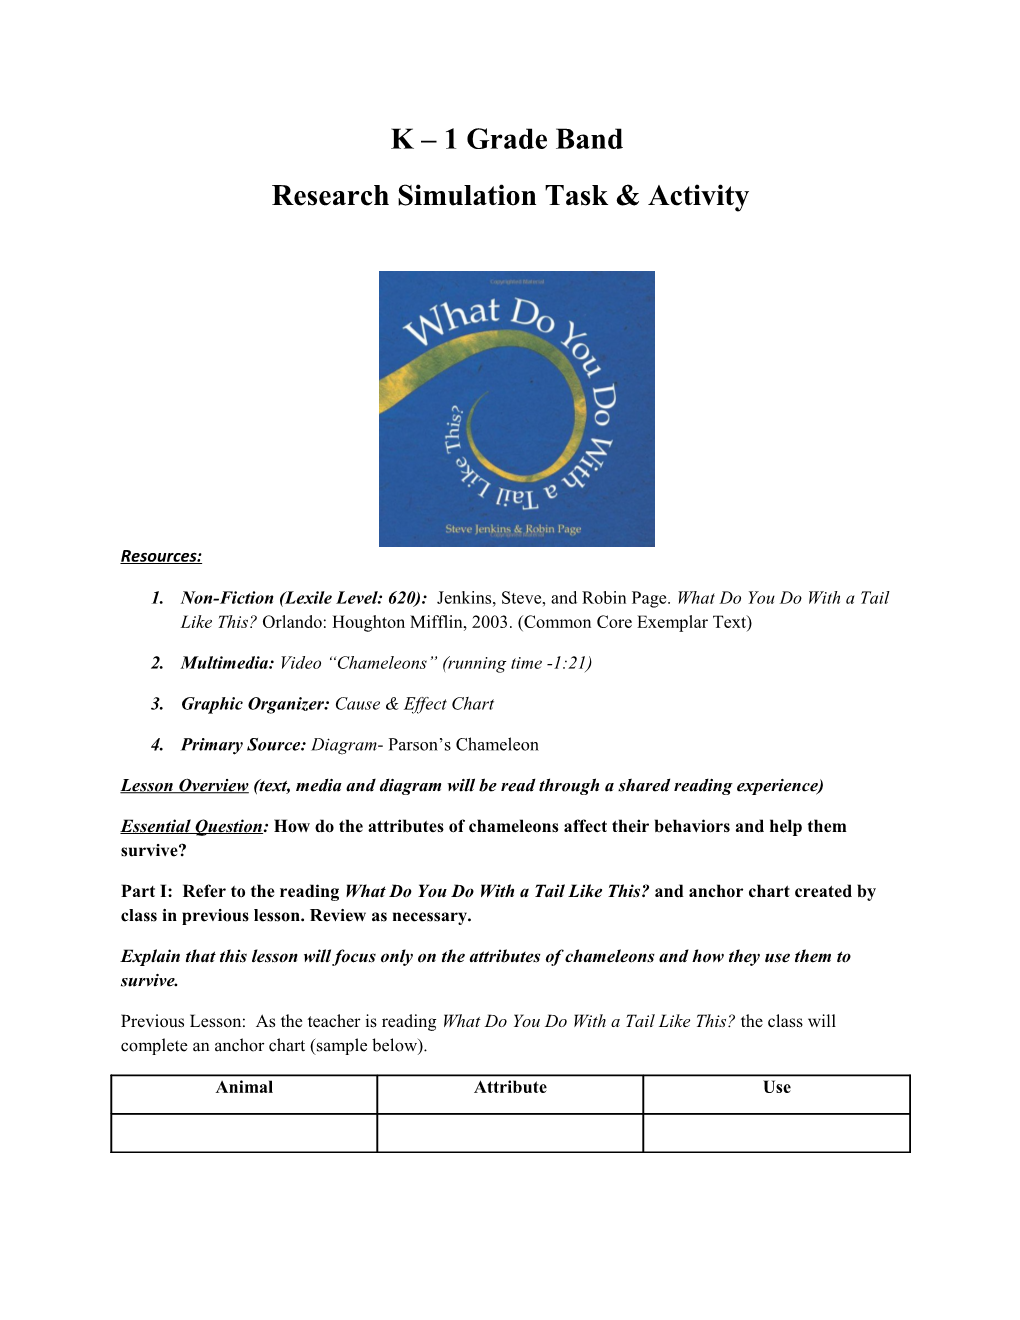 Research Simulation Task & Activity